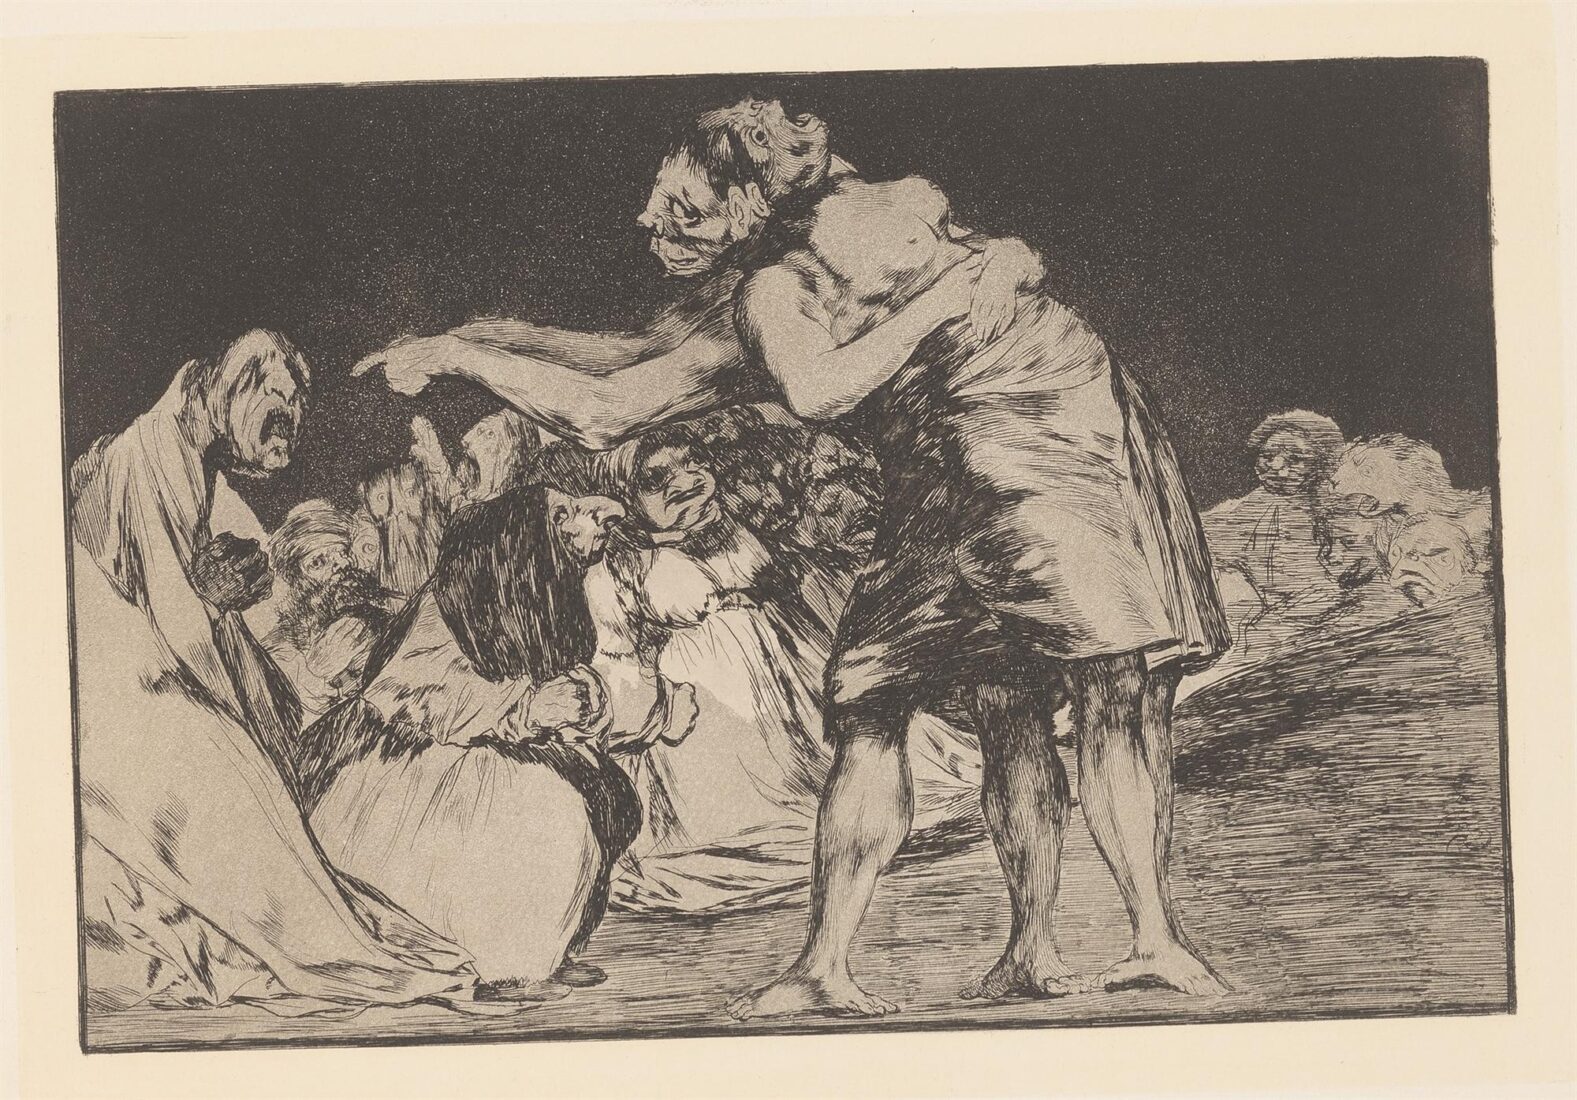 Matrimonial folly or Disorderly folly [She who is ill wed  never misses a chance to say so]. Disparate matrimonial, Disparate desordenado [La que mal marida nunca le falta que diga] - Goya y Lucientes Francisco